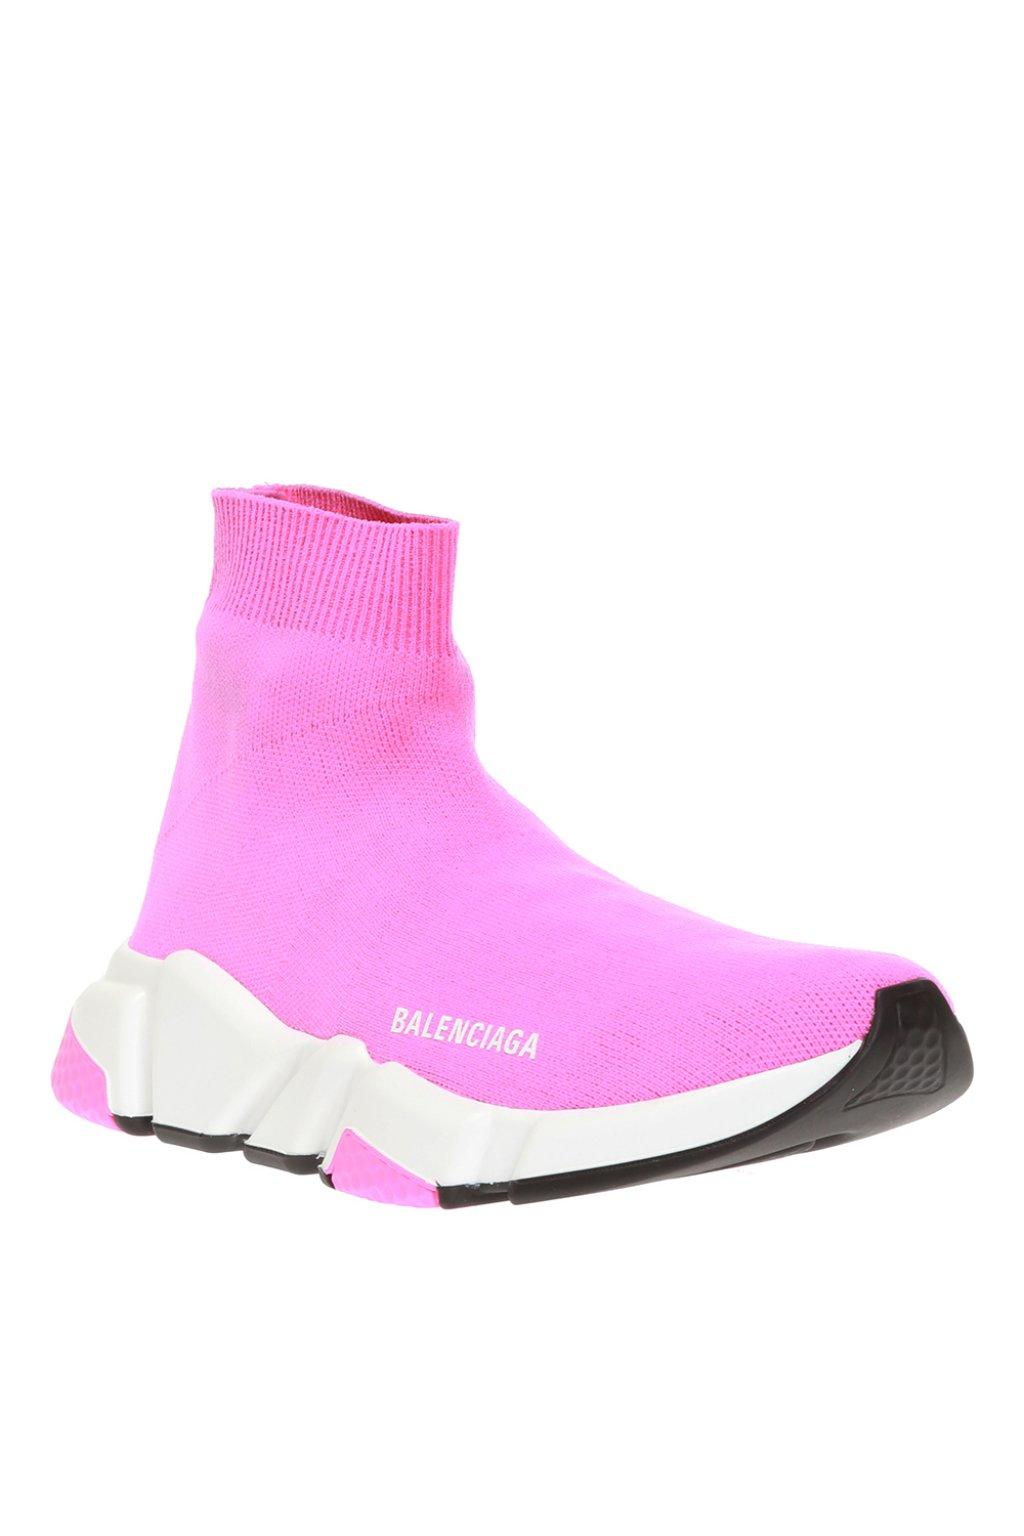 Balenciaga Speed High Top Sock Trainers in Pink/White (Pink) - Save 11% ...